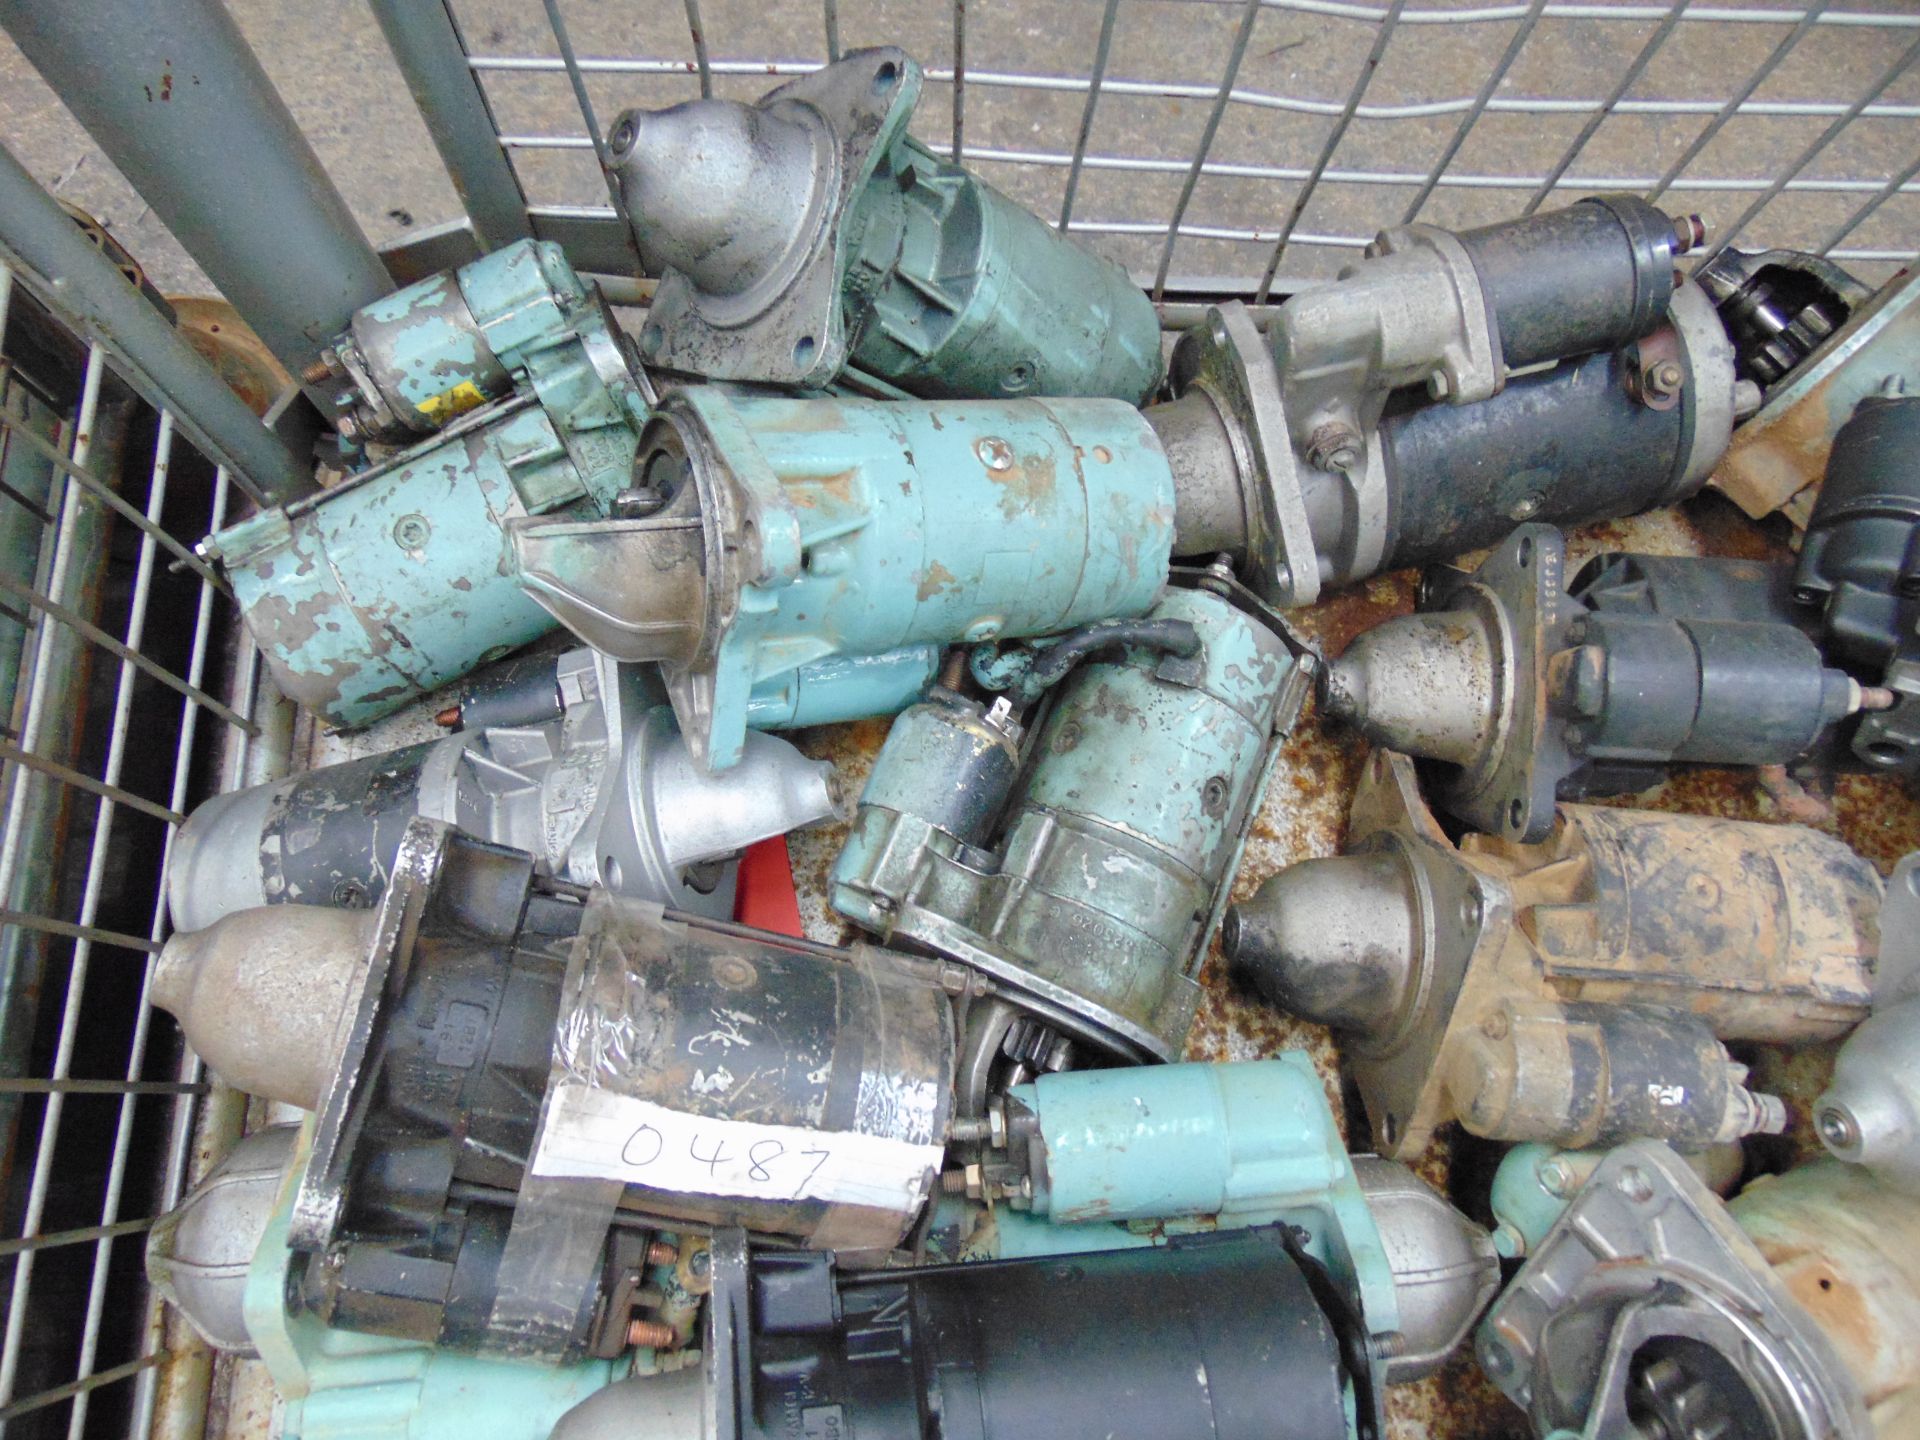 43 x Takeout Land Rover Starter Motors - Image 2 of 9